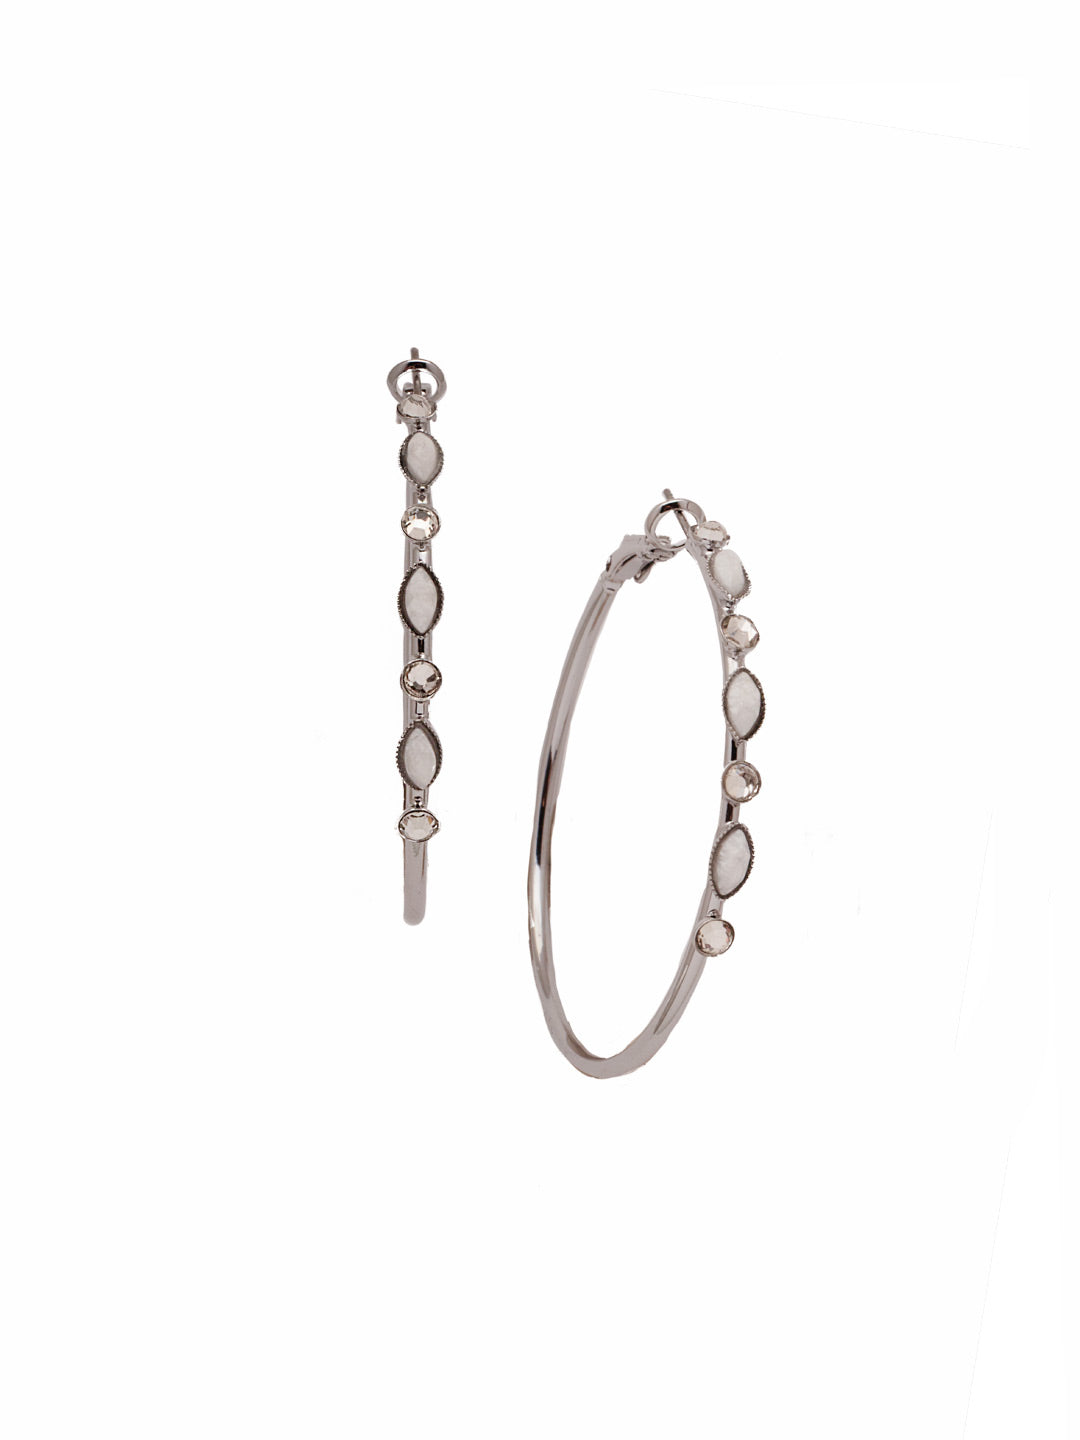 Somer Hoop Earring - EEV7PDCRY - <p>The Somer Hoop Earrings showcase signature Sorrelli crystals in round and navette shapes on a classic round shaped hoop. From Sorrelli's Crystal collection in our Palladium finish.</p>